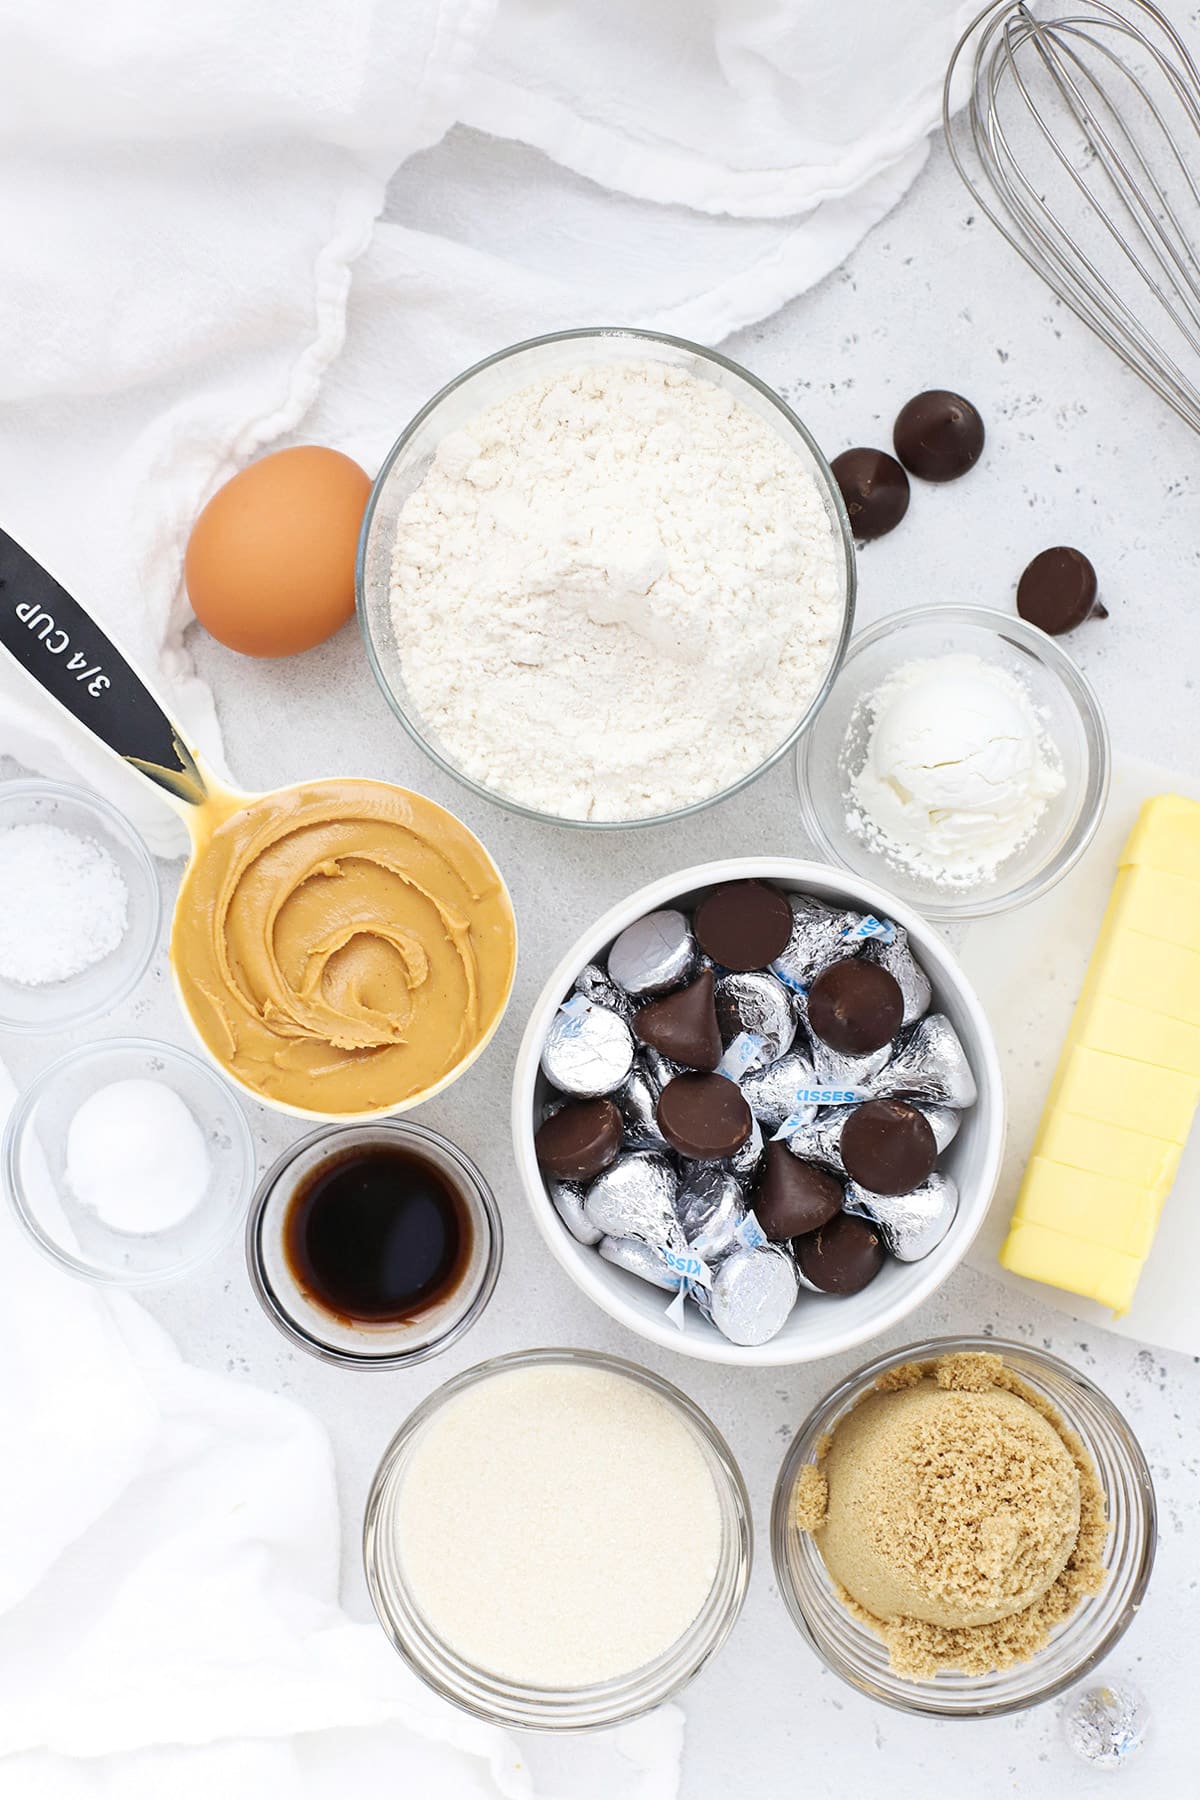 Overhead view of ingredients for gluten-free peanut butter blossoms